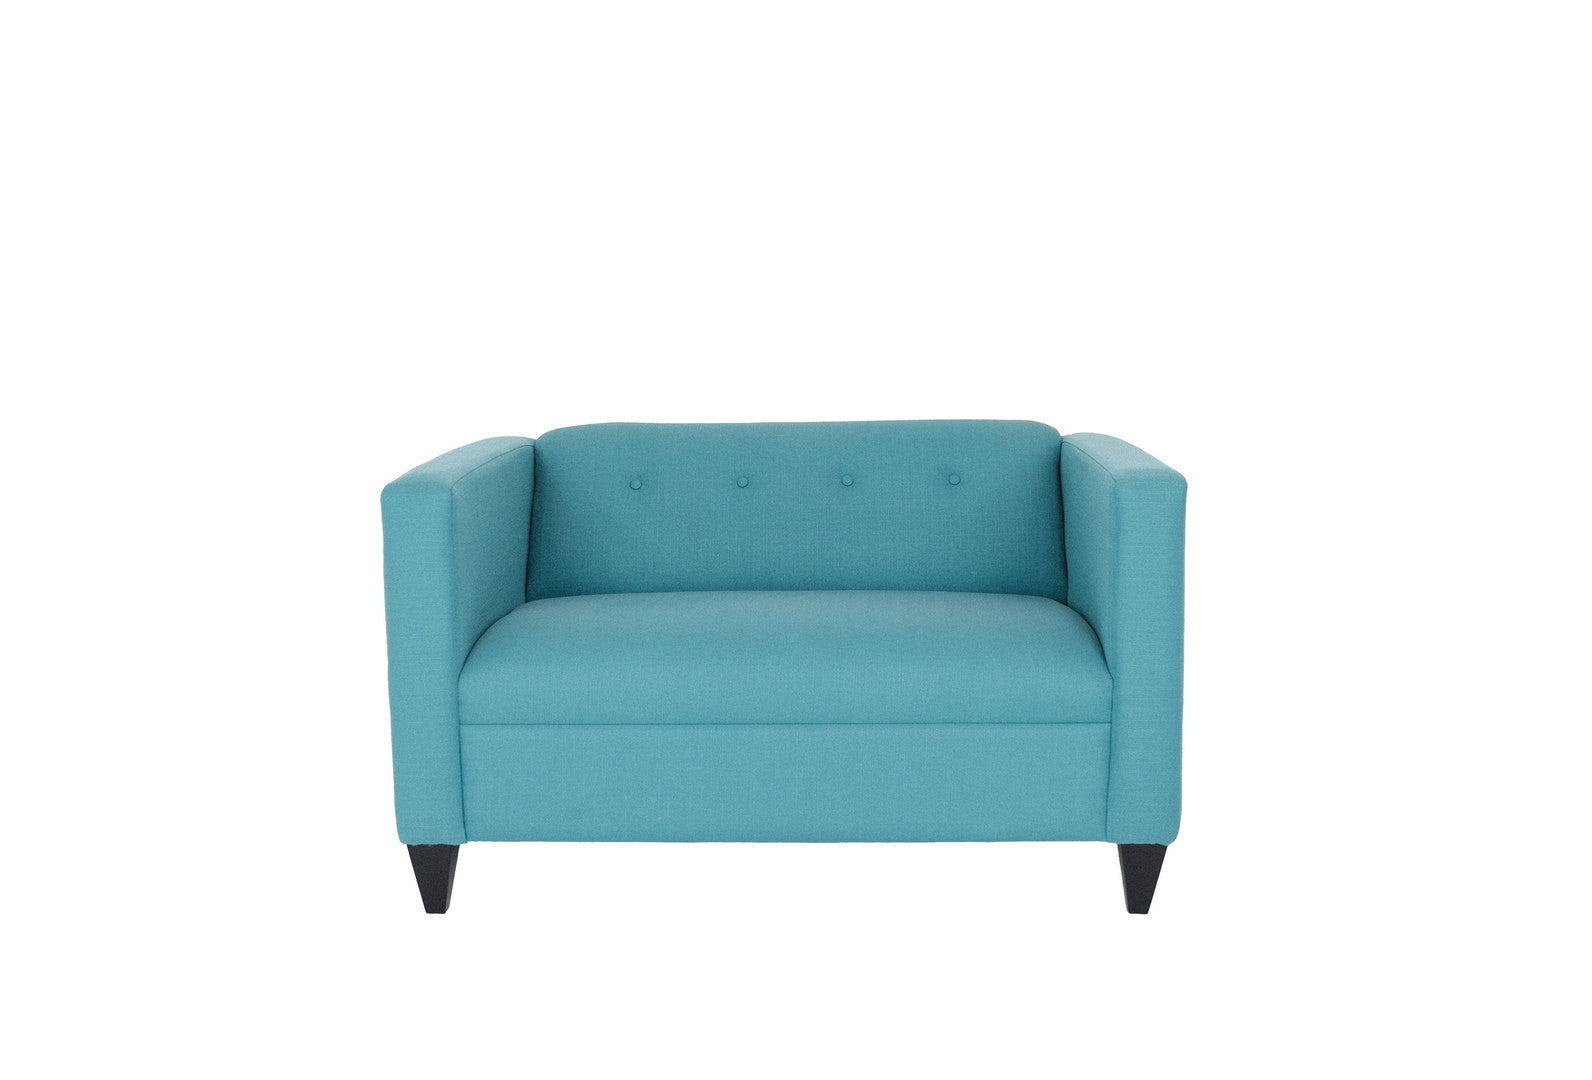 50" Teal Blue And Dark Brown Polyester Blend Loveseat